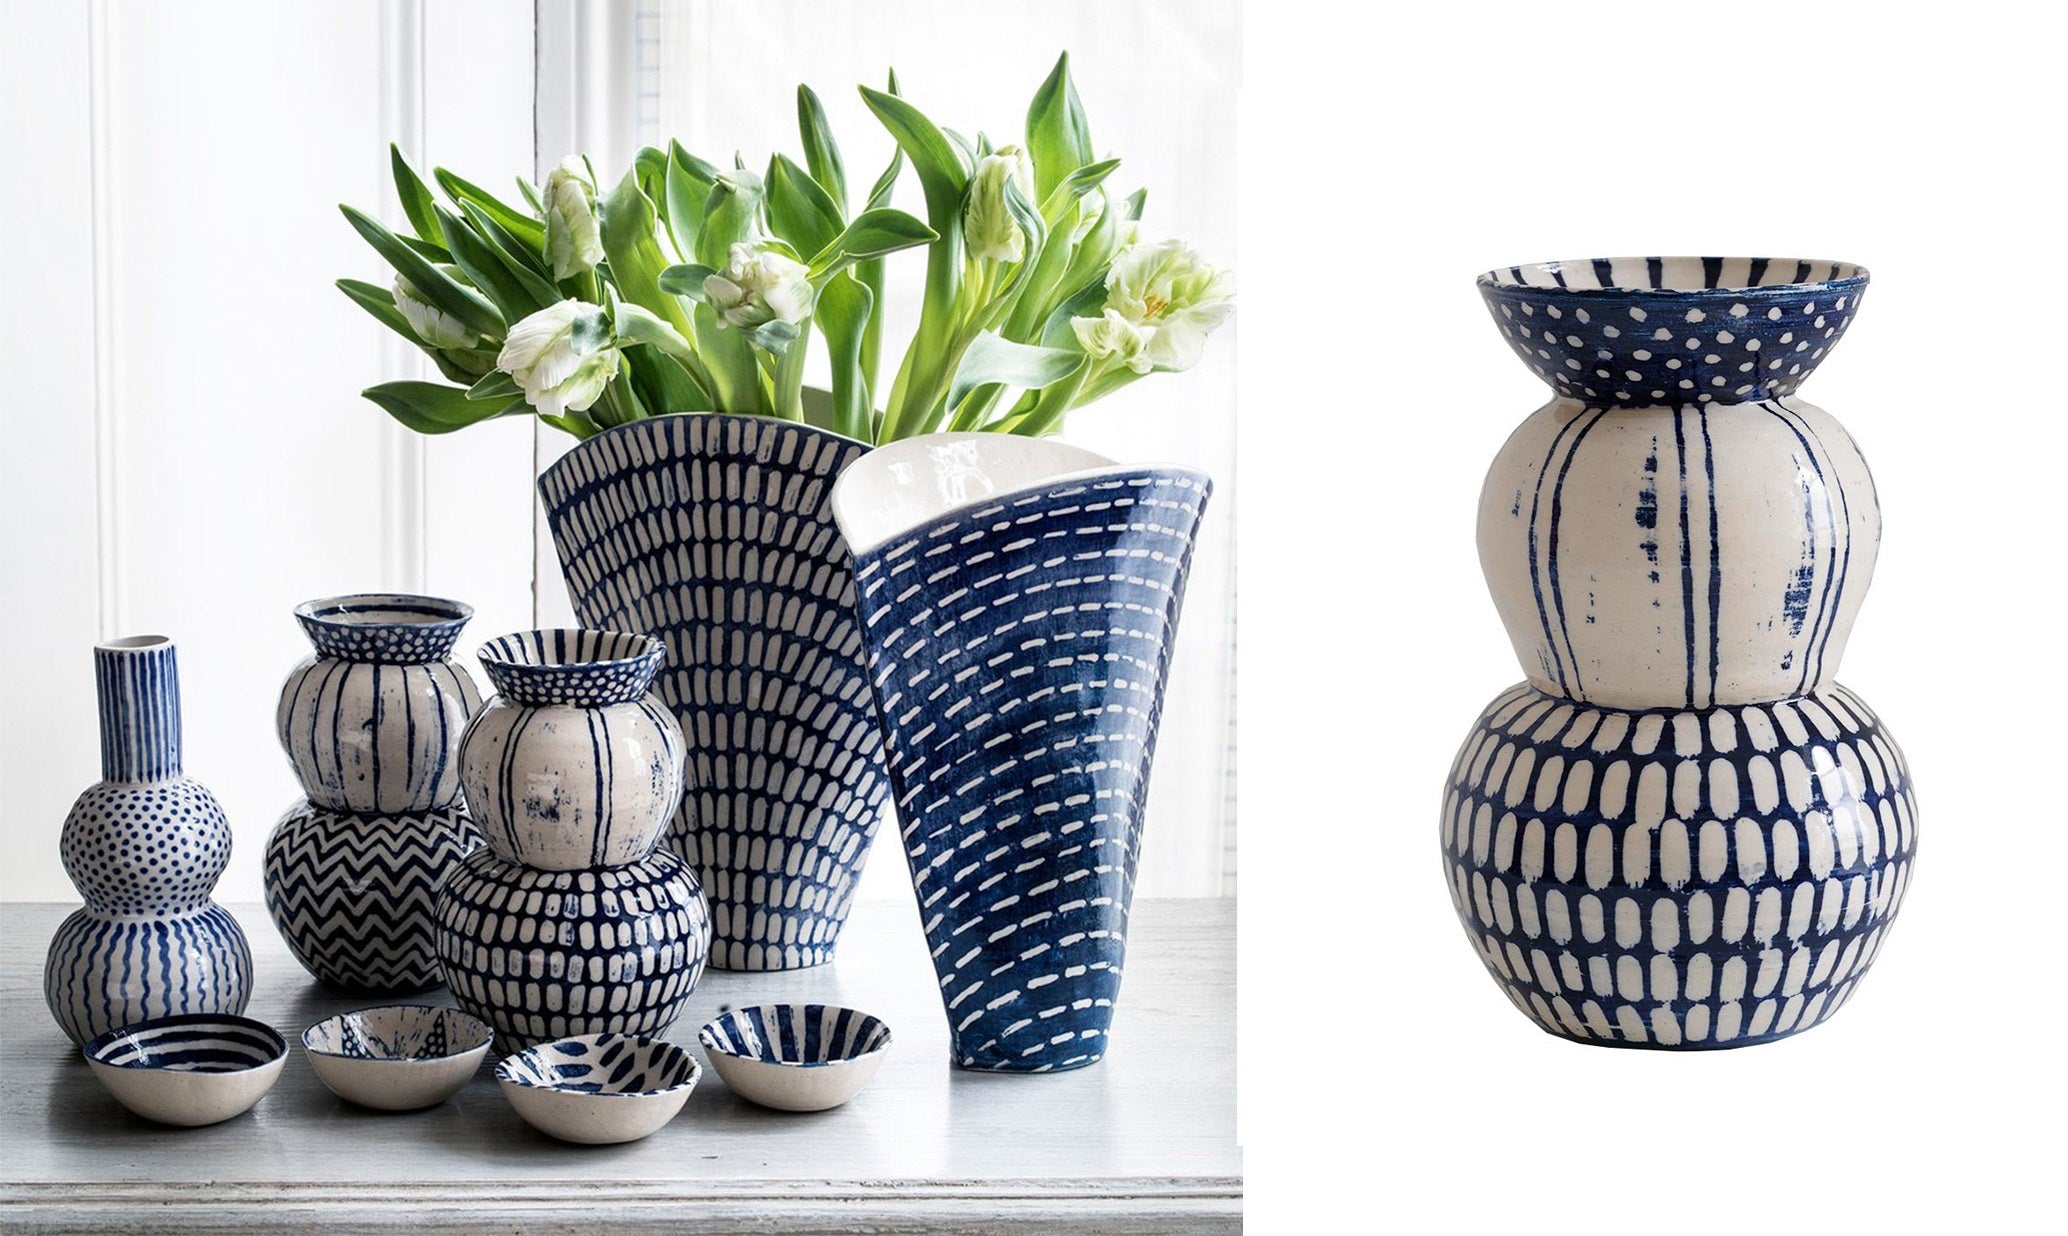 Wicklewood hand made and hand-painted blue and white South African ceramic bowls and vases